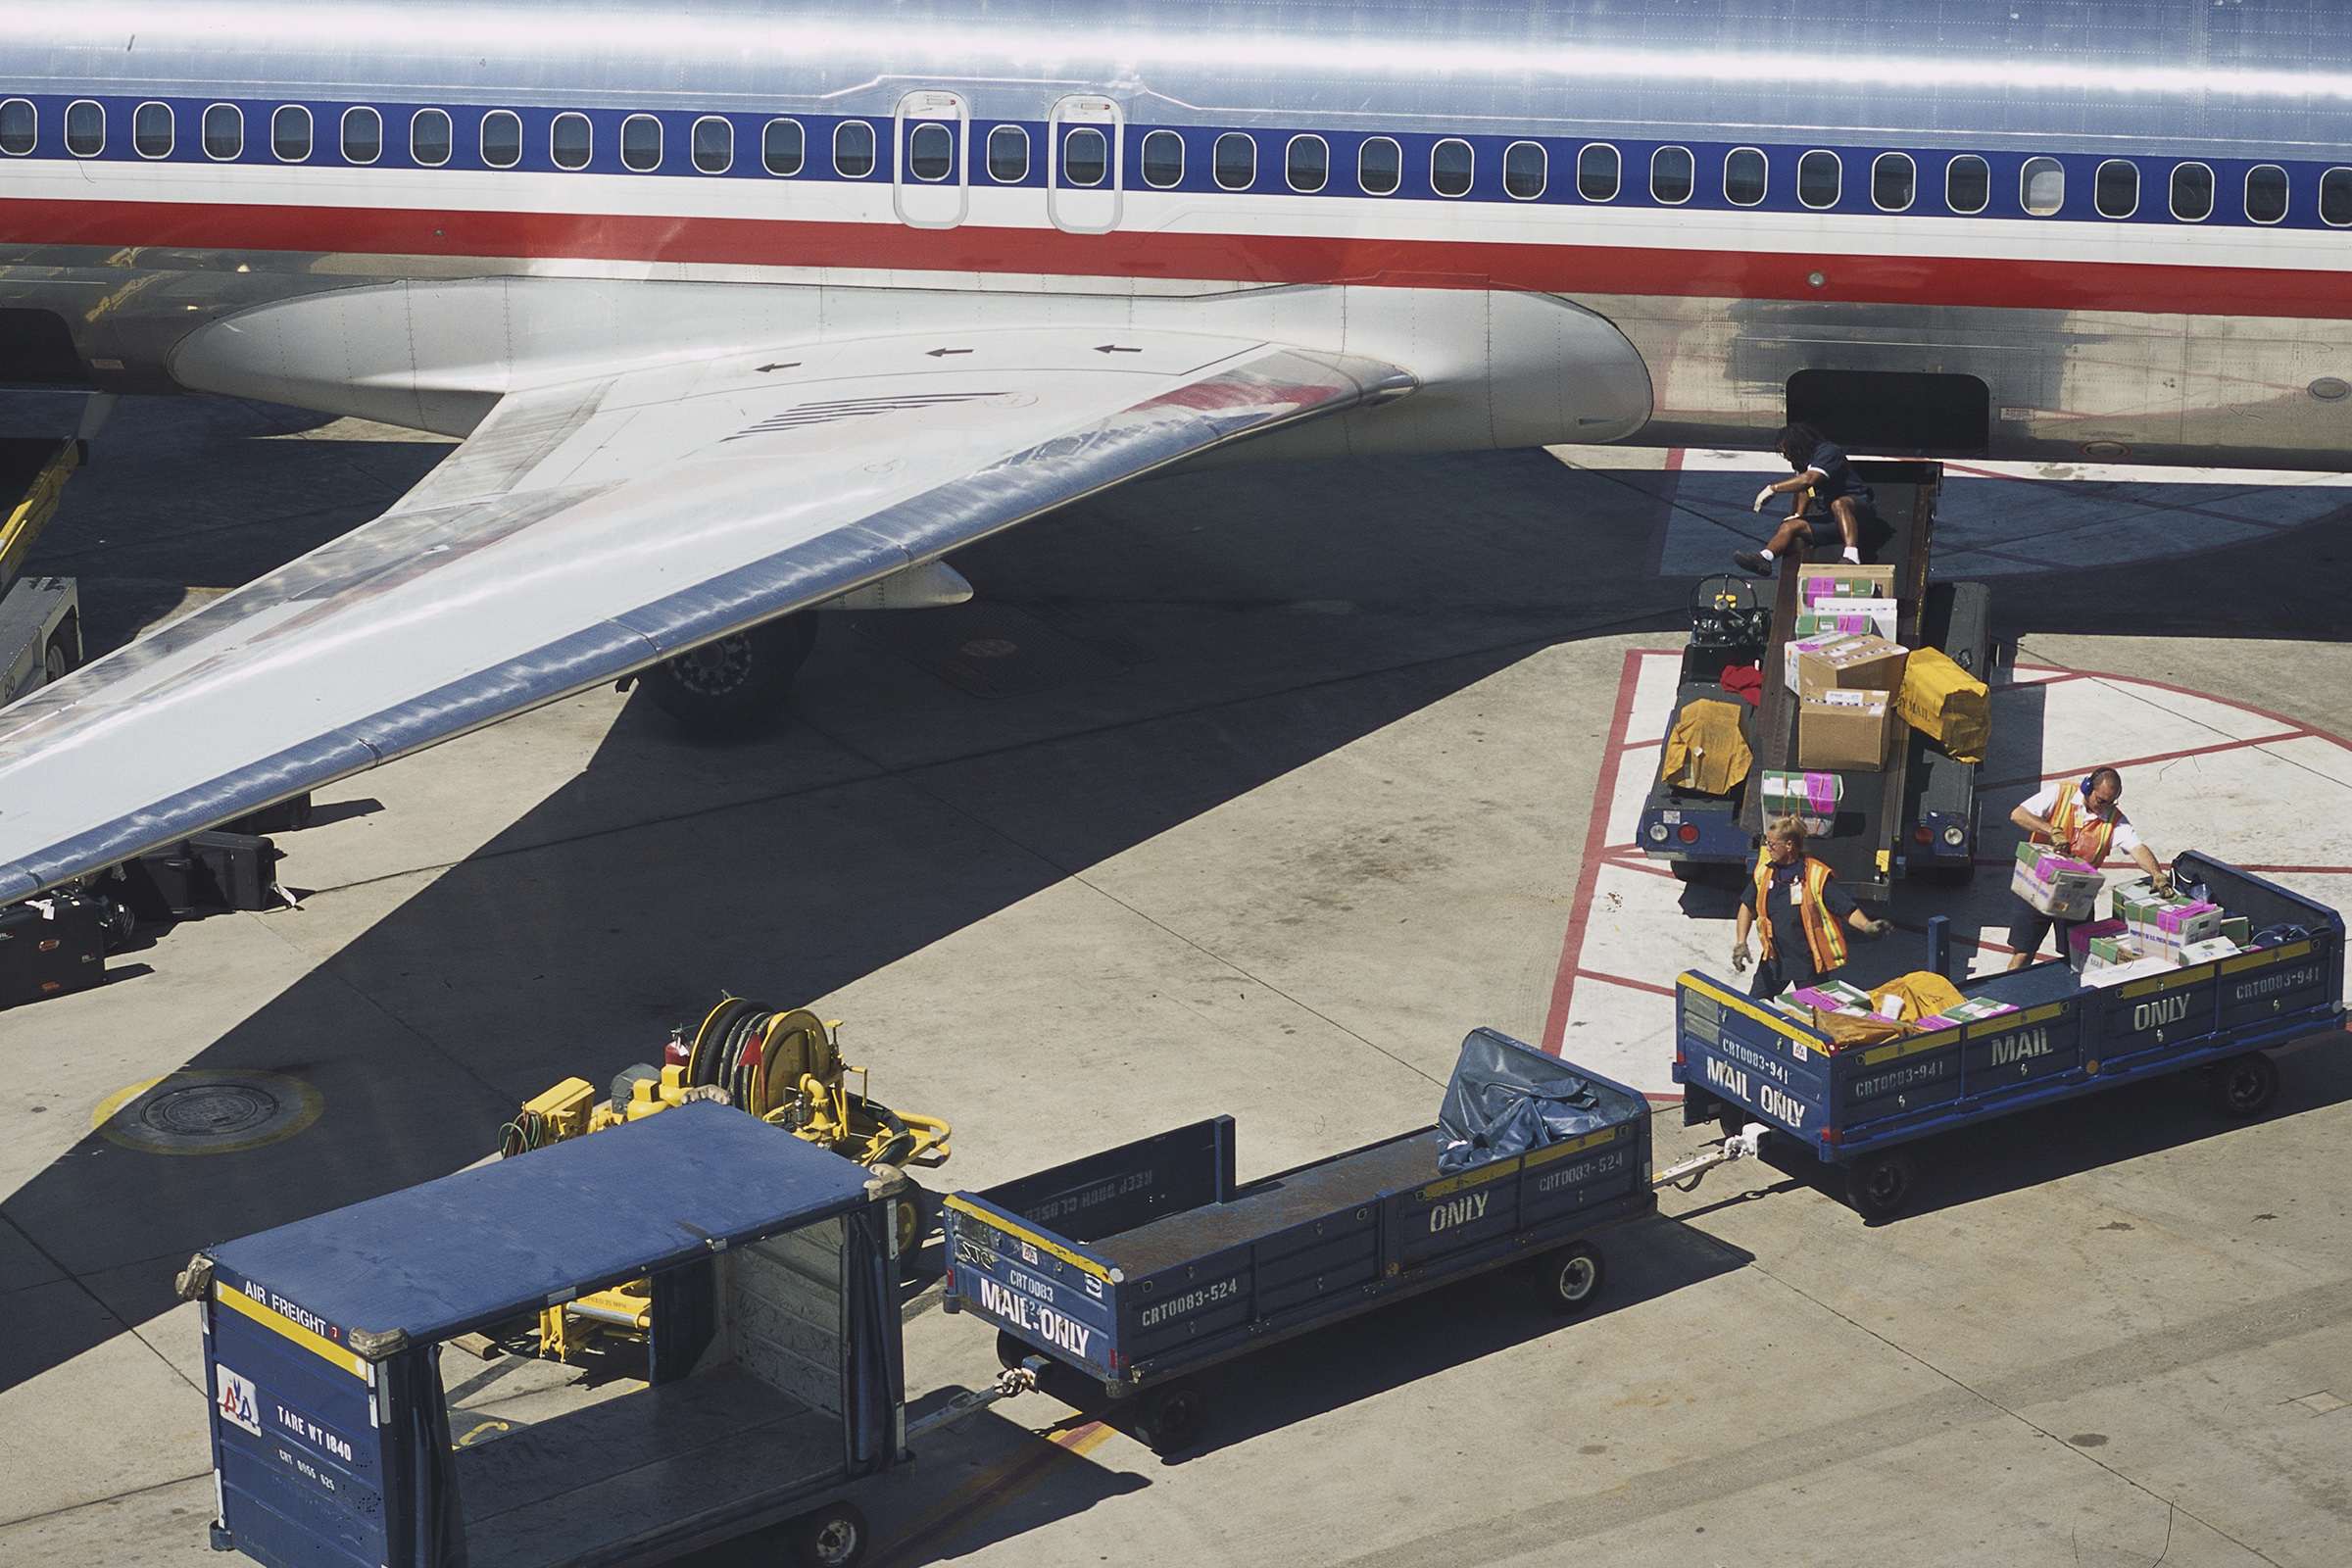 American Airlines' baggage handlers transport passenger's goods at Dallas-Fort Worth International Airport